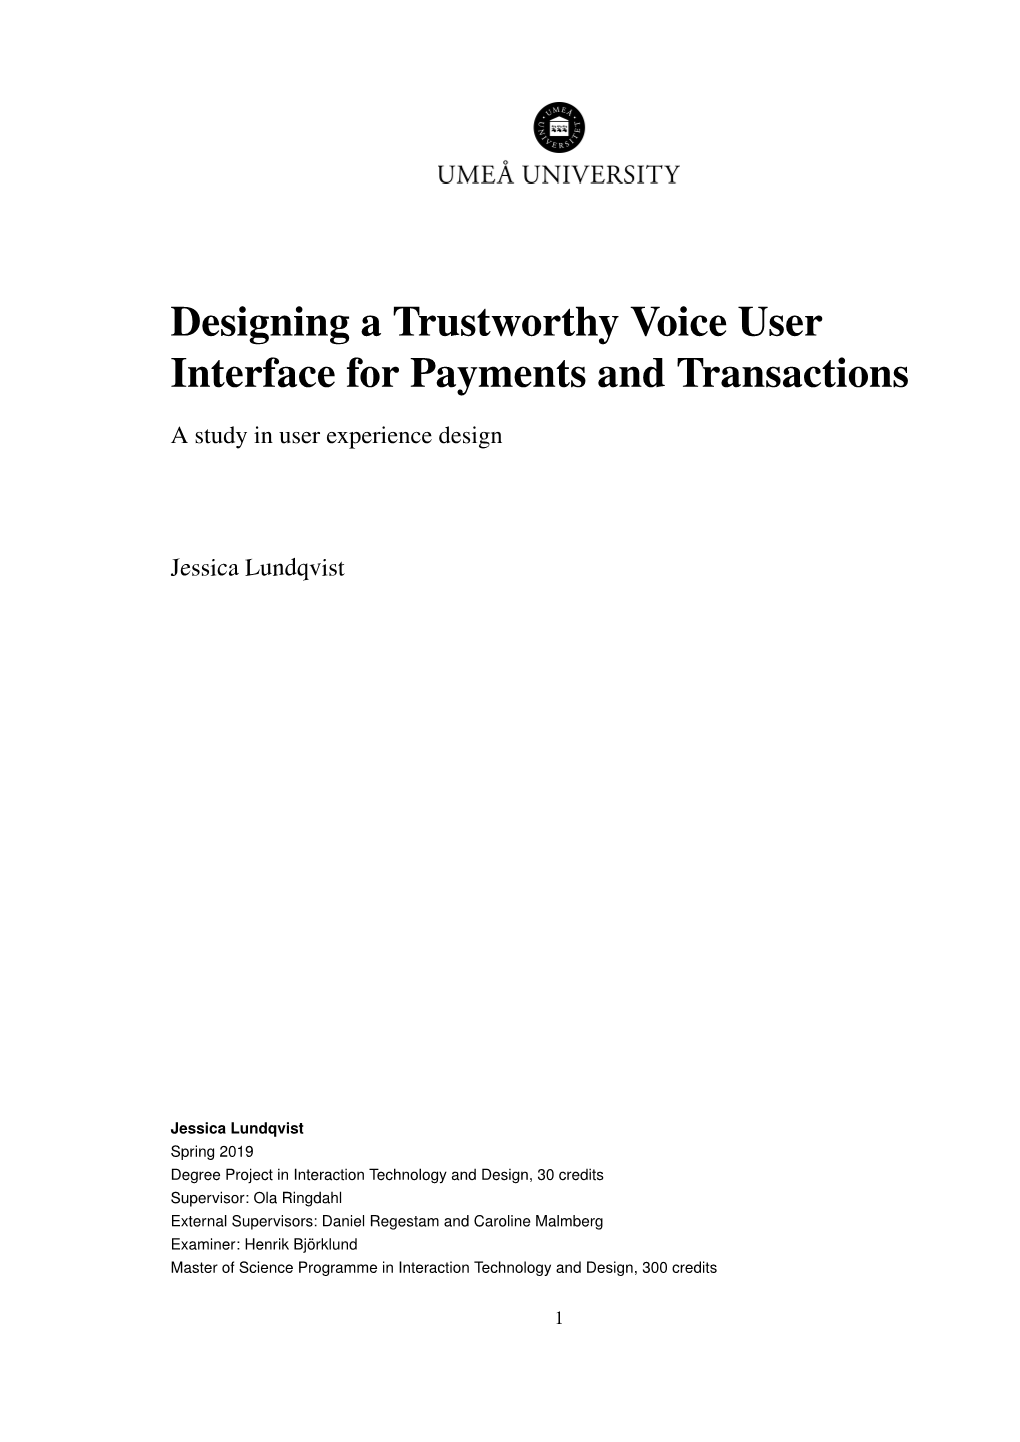 Designing a Trustworthy Voice User Interface for Payments and Transactions